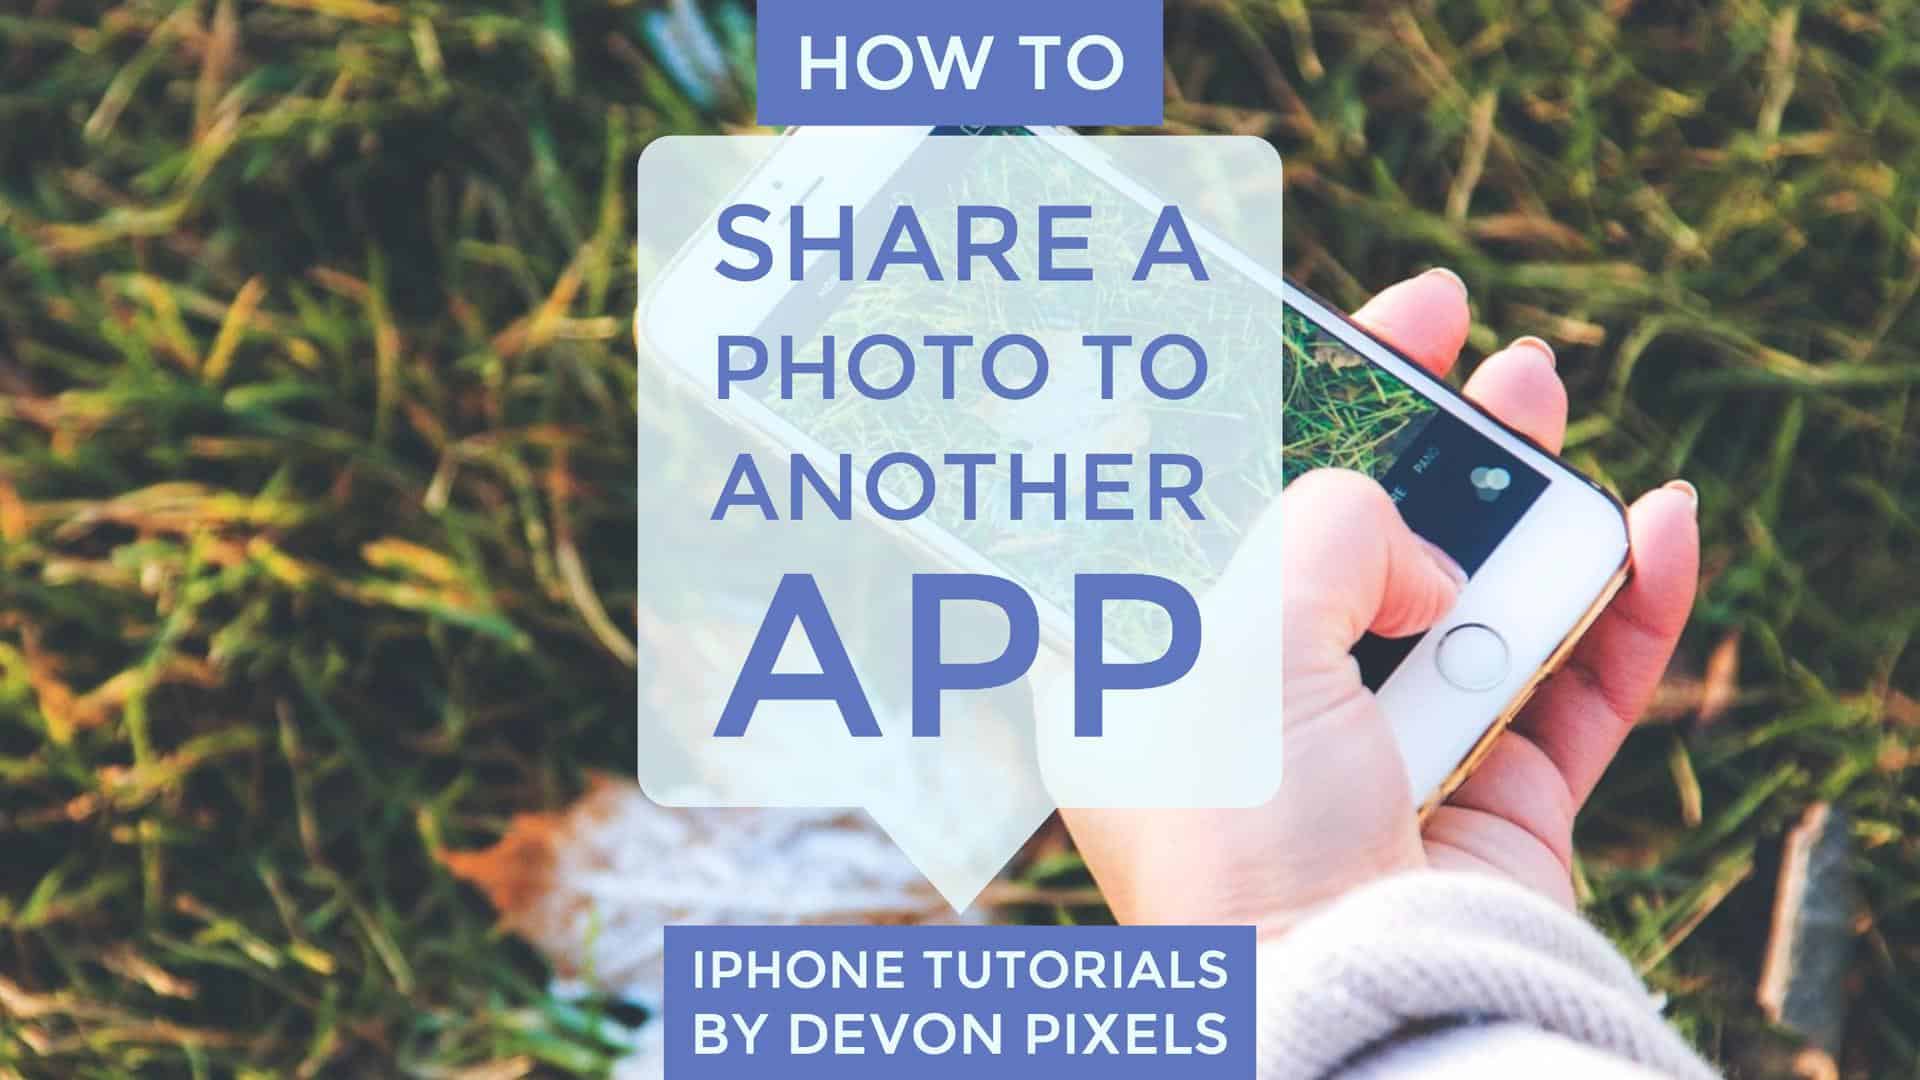 How to Share a Photo to another App on iPhone